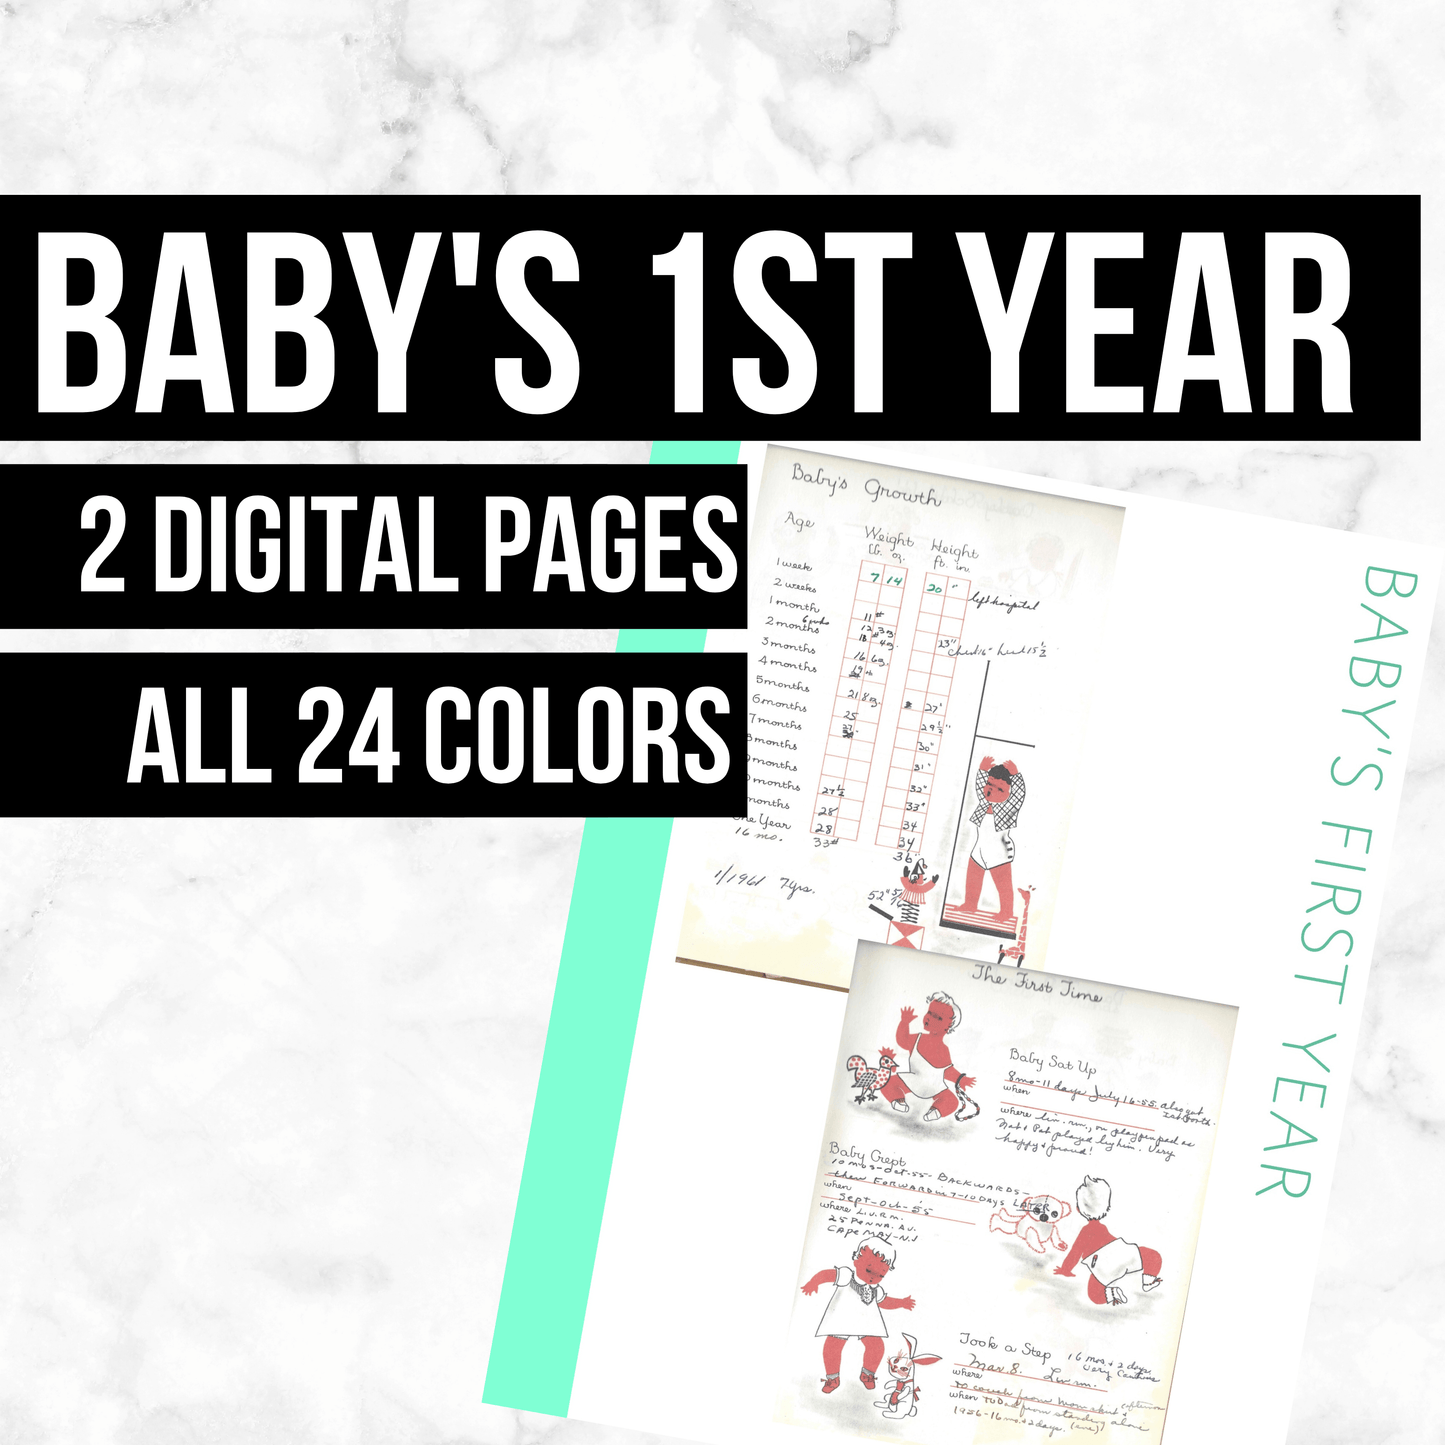 Baby's First Year: Printable Genealogy Form (Digital Download)